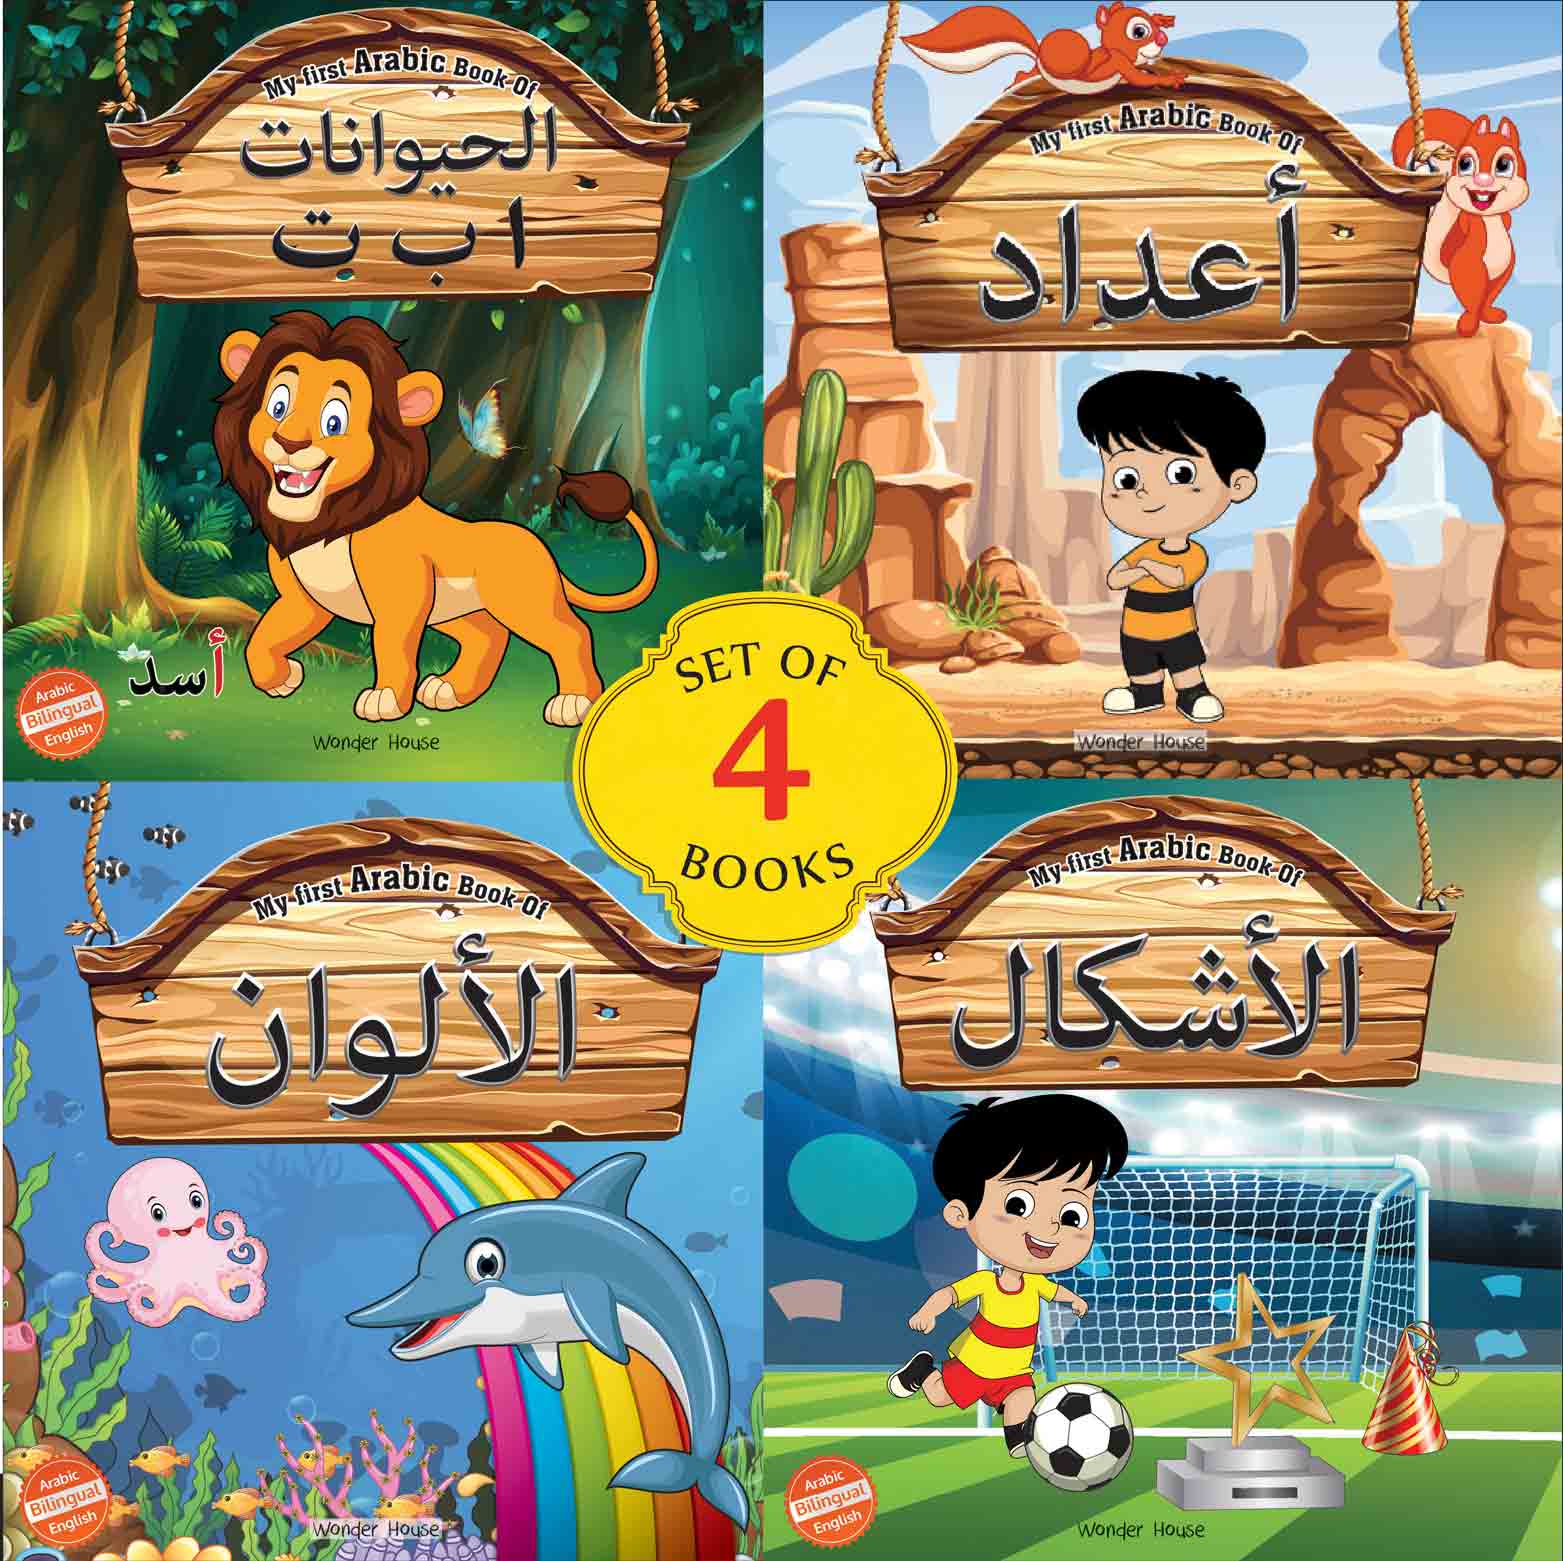 My First Arabic Book Box Set of 4 books: A set of four books for children